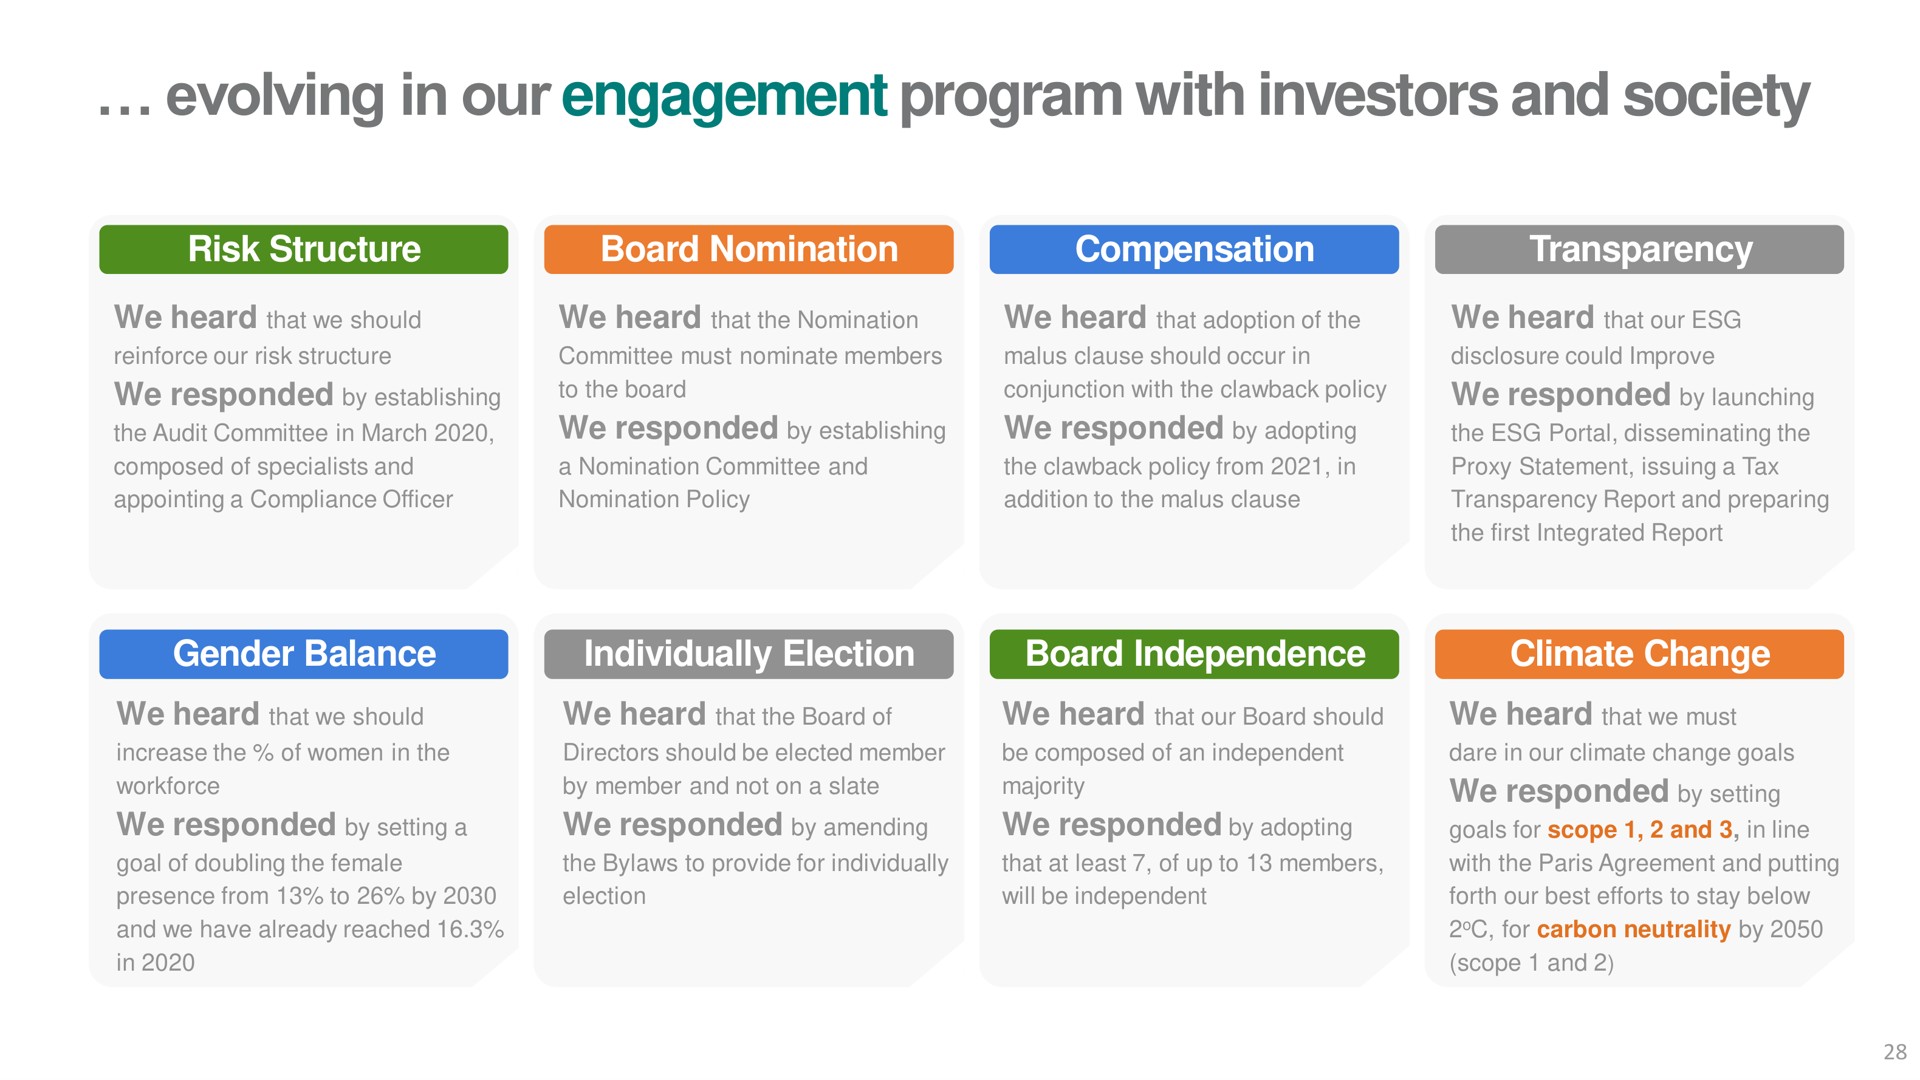 evolving in our engagement program with investors and society structure risk board nomination gender balance individually election board independence climate change | Vale